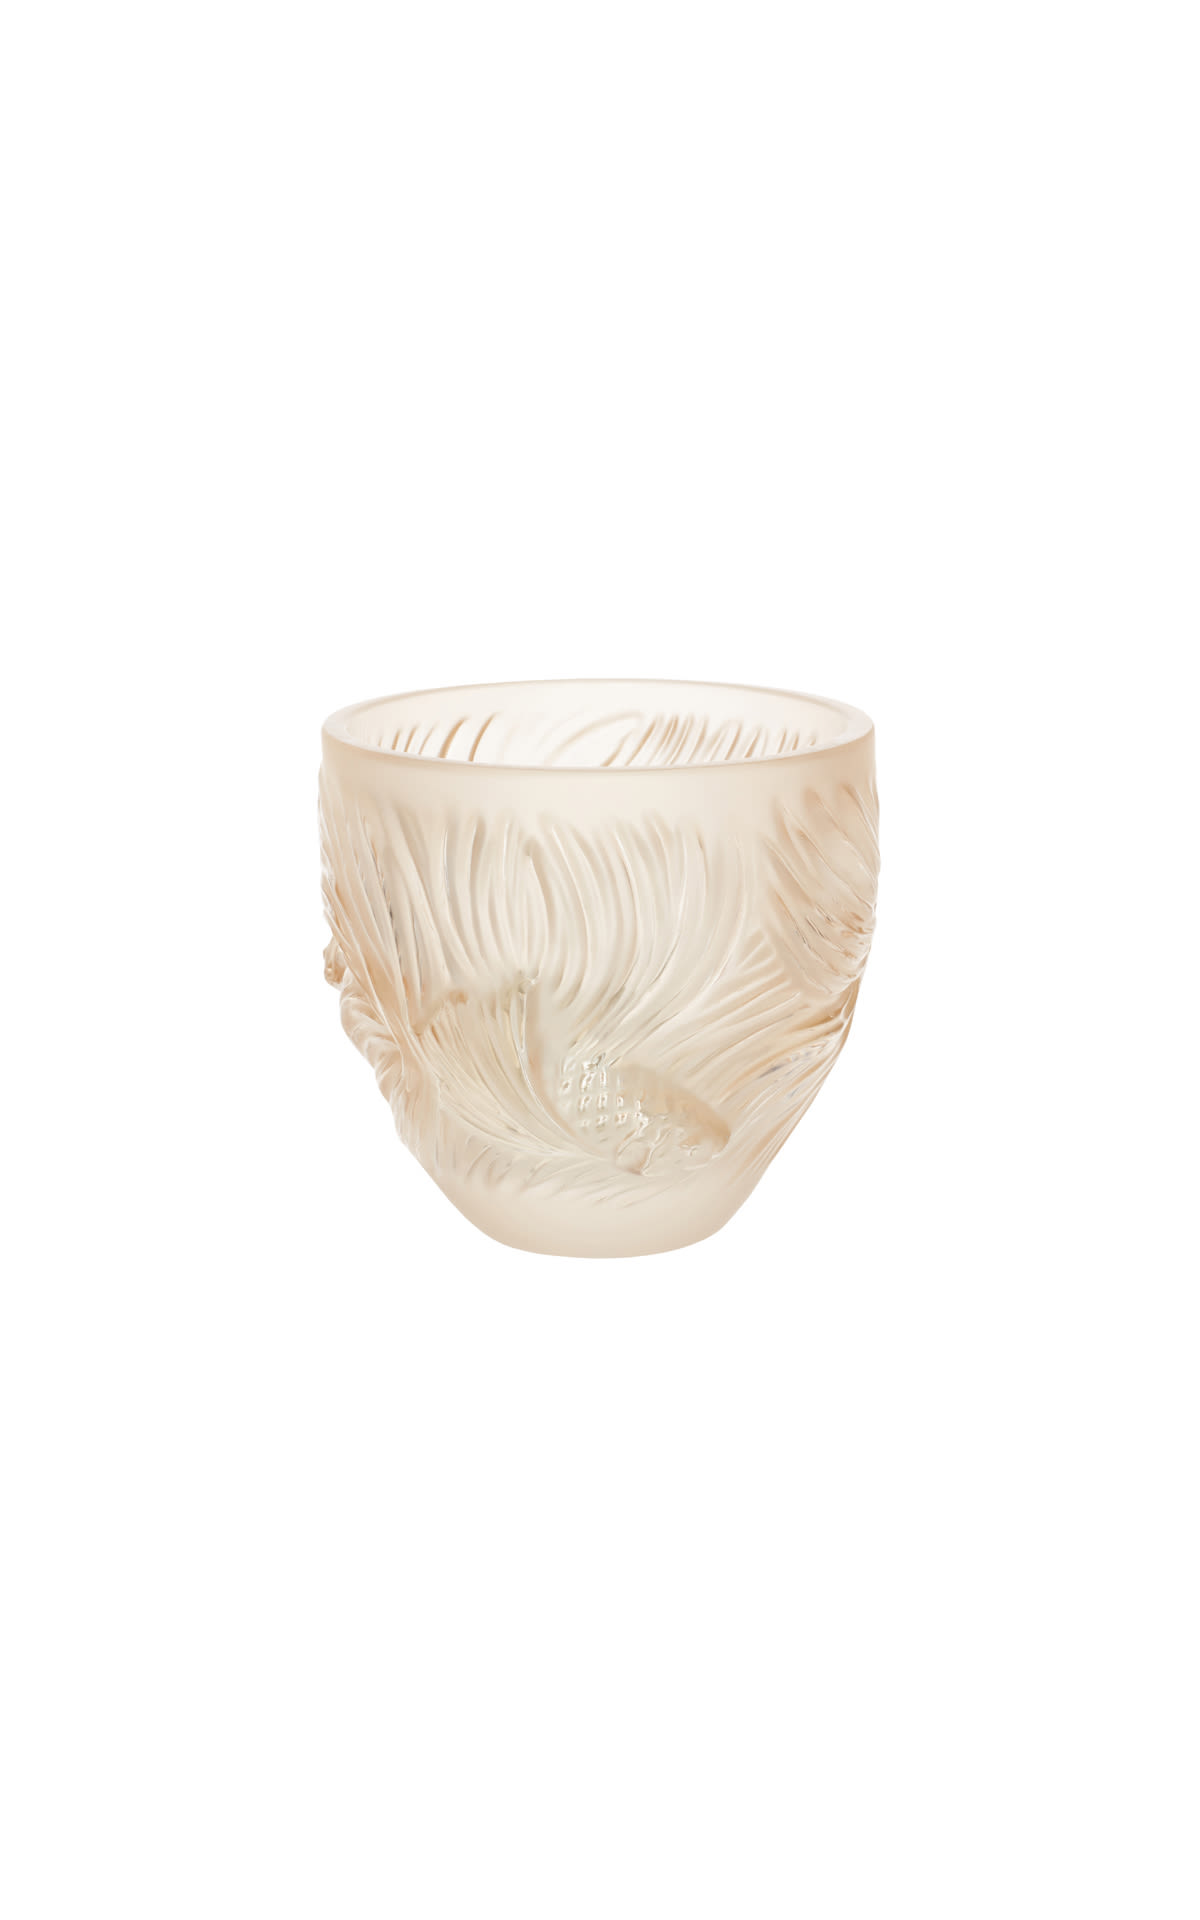 Lalique Voltive candle holder from Bicester Village